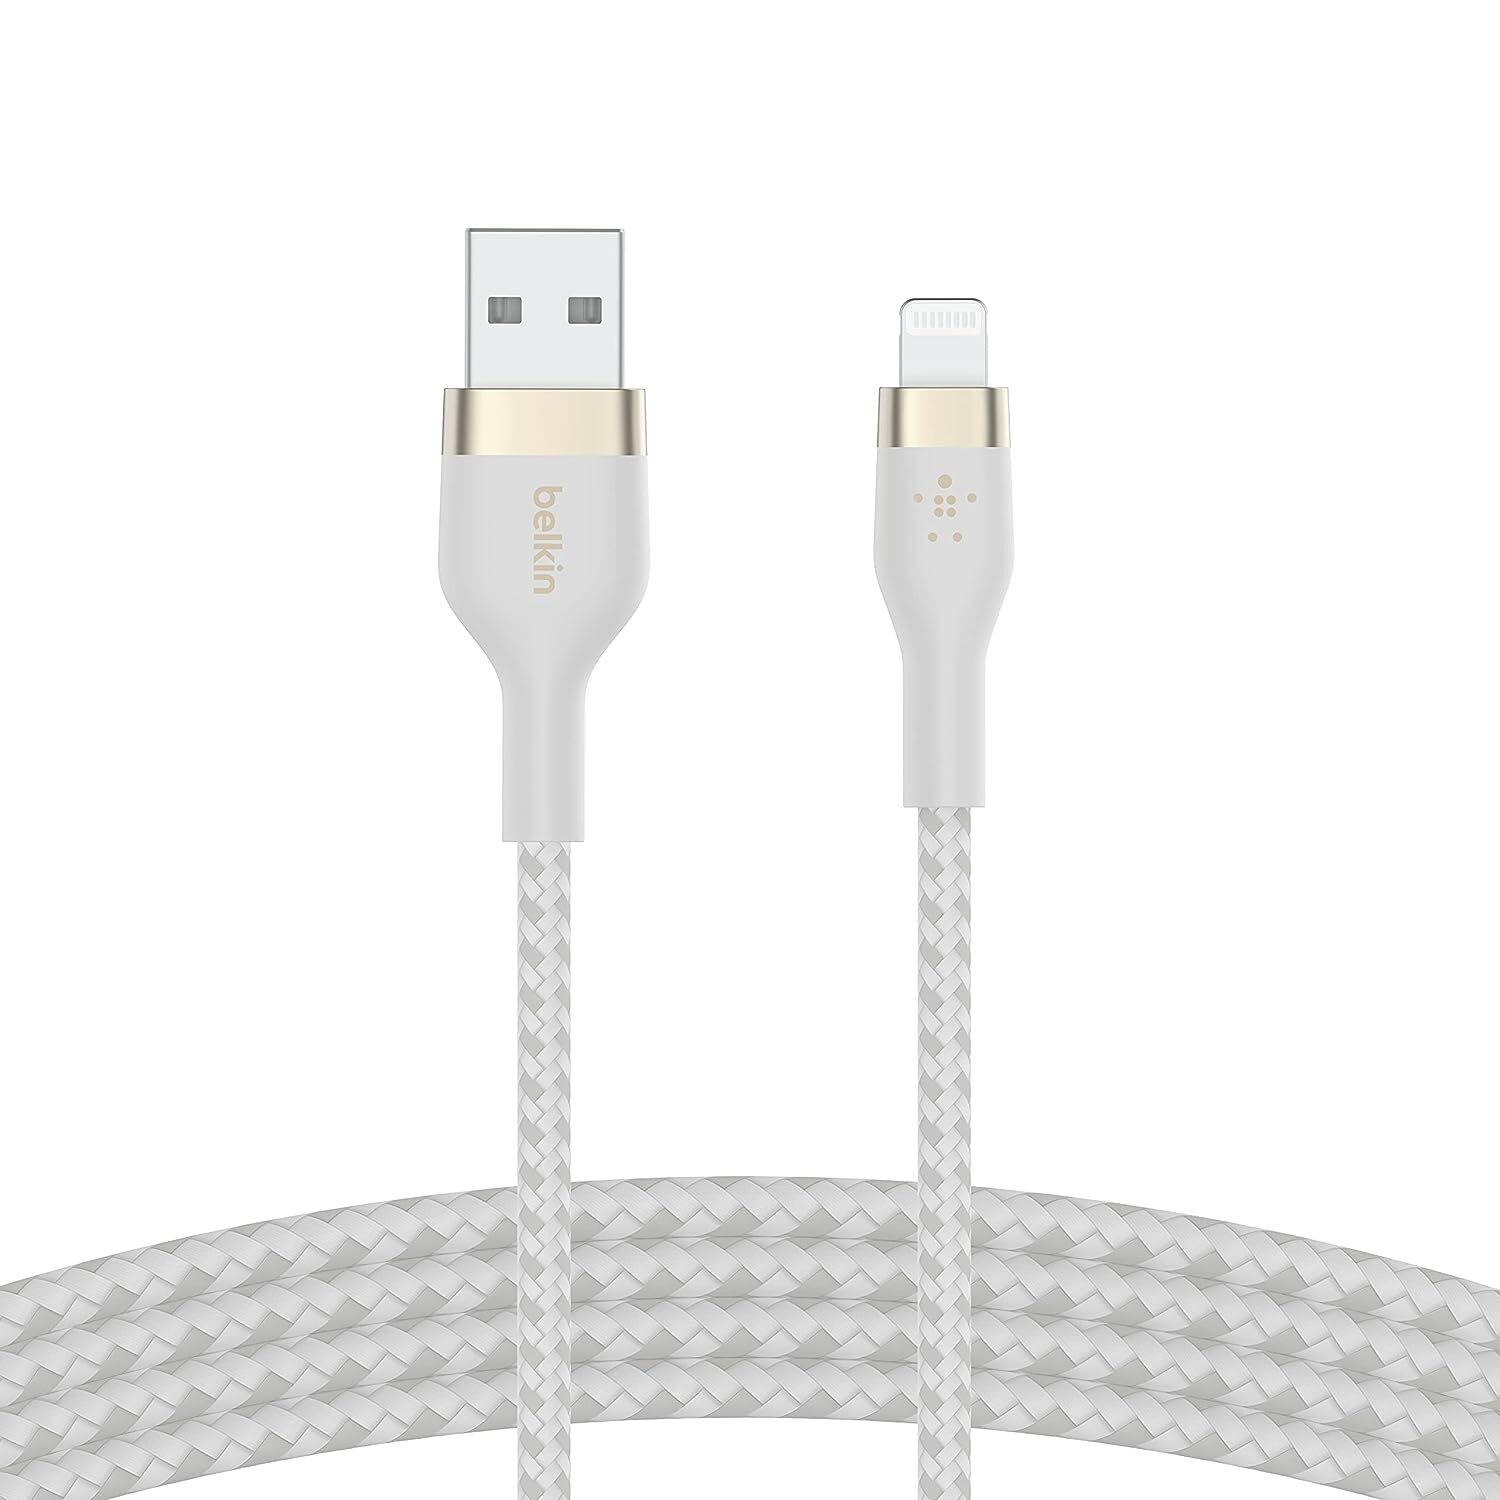 Belkin Apple Certified Lightning To Usb Charge And Sync Flexible Silicone, Double Nylon Braided Cable For Iphone, Ipad, Air Pods, Smartphone 3.3 Feet (1 Meters) White